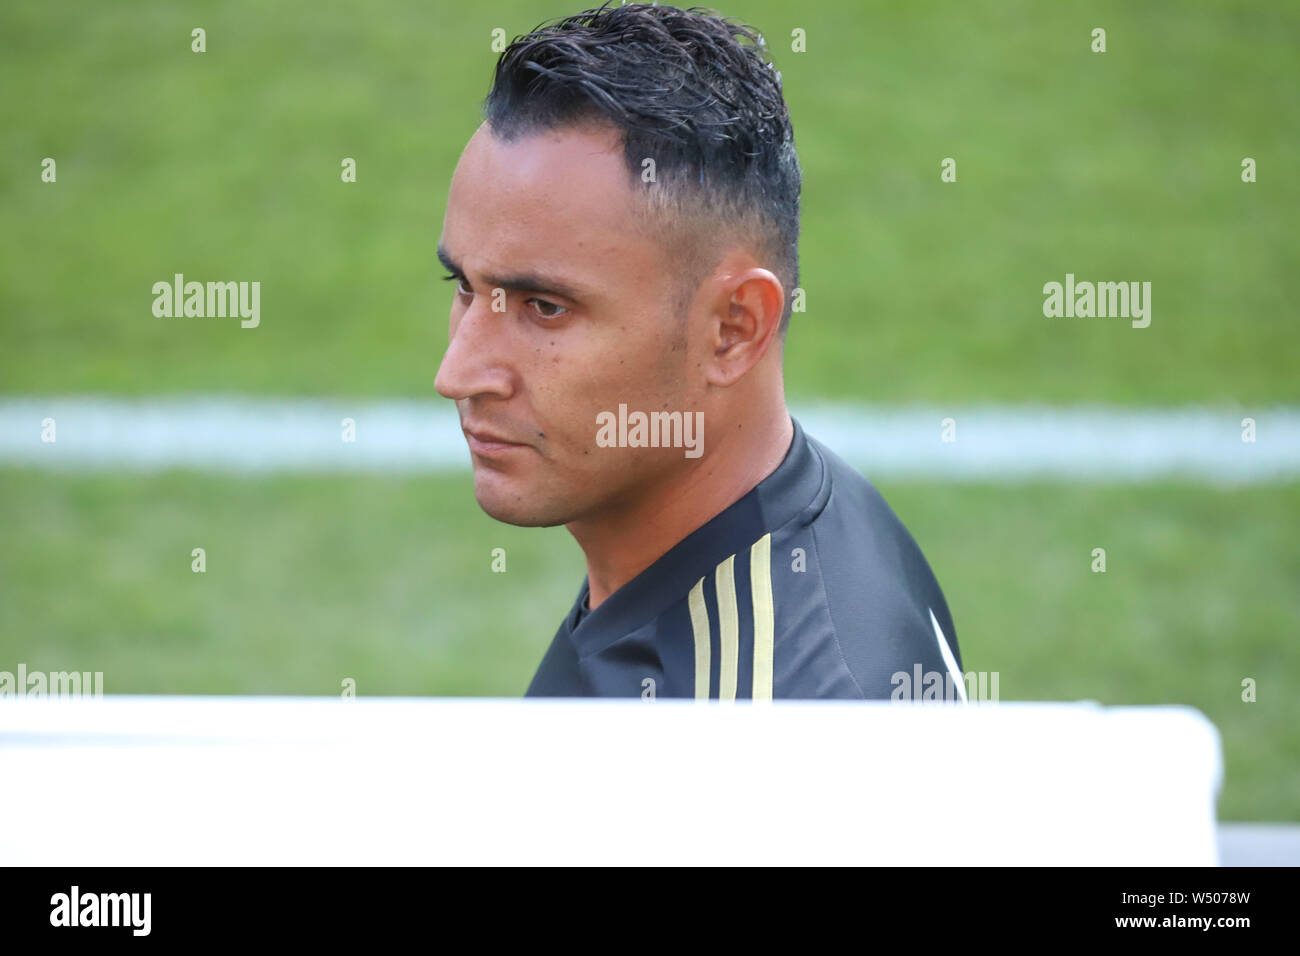 East Rutherford, United States. 25th July, 2019. Navas of Real Madrid during training at MetLife Stadium in the city of East Rutherford on Thursday, 25. The team faces Atletico Madrid tomorrow for the International Champions Cup. Credit: Brazil Photo Press/Alamy Live News Stock Photo